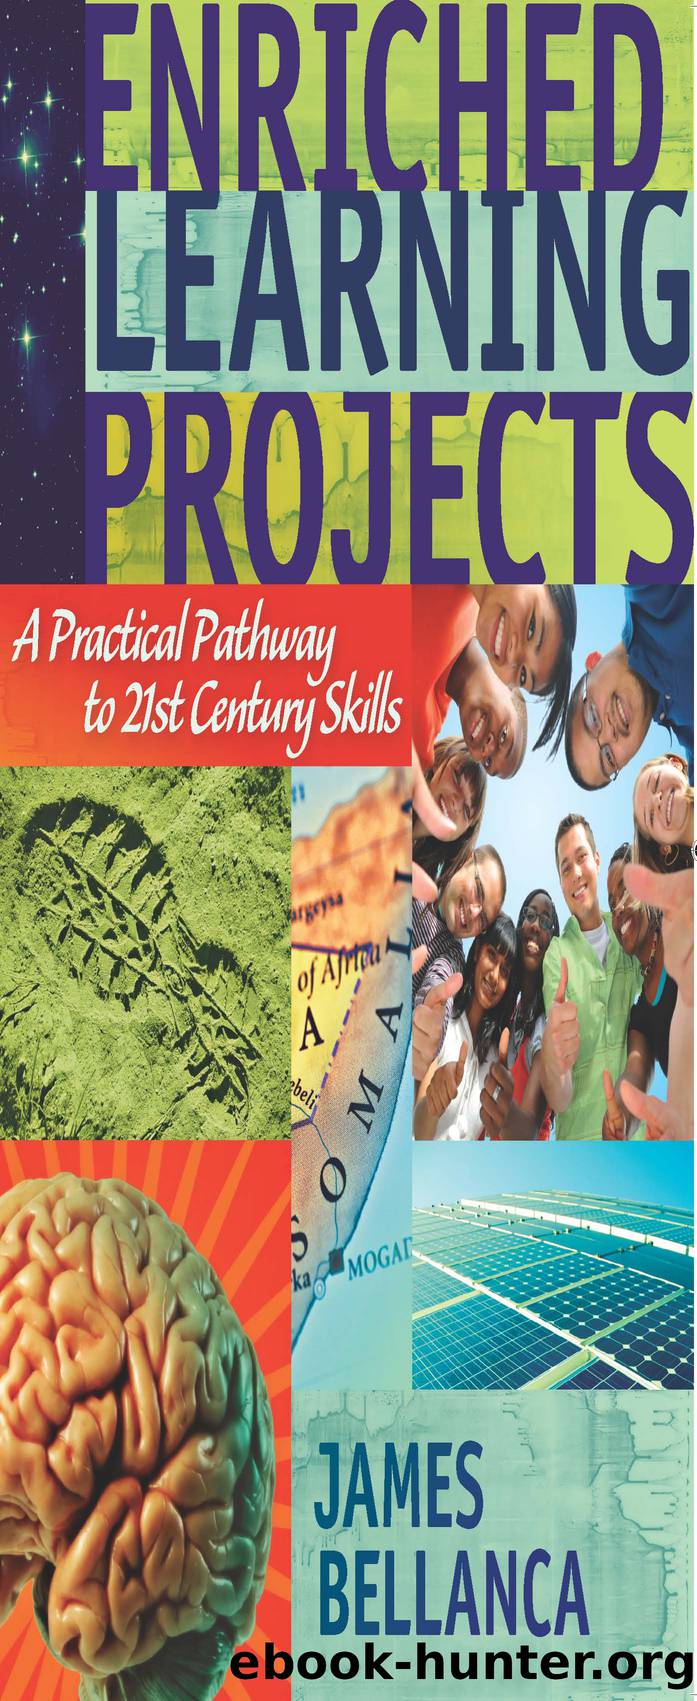 Enriched Learning Projects by Bellanca James;